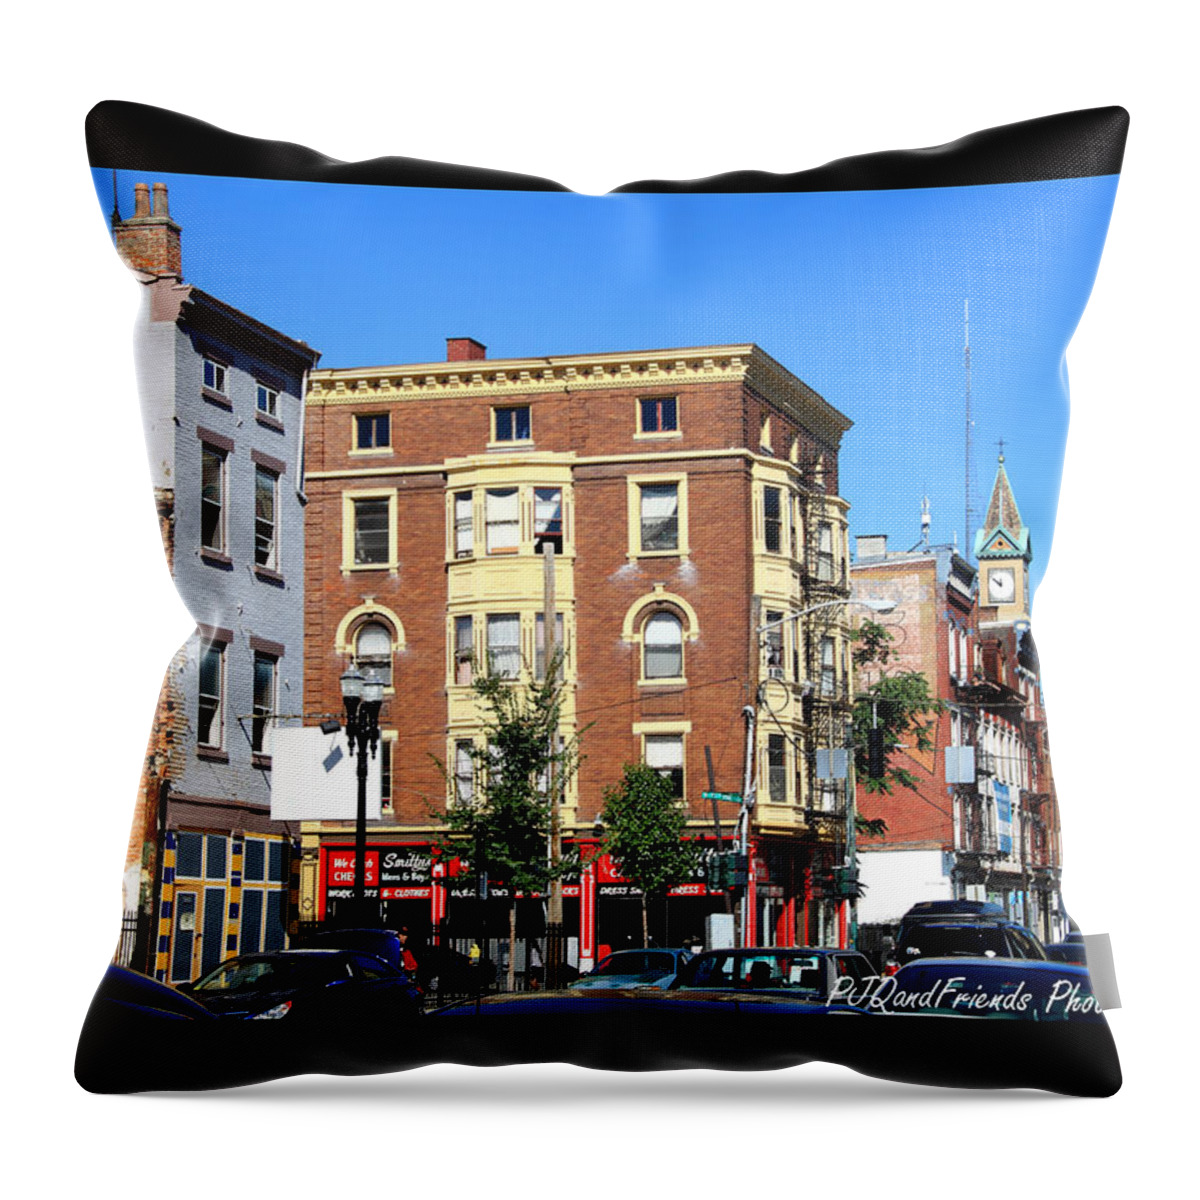 City Walk - Over-the-rhine Throw Pillow featuring the photograph City Walk - Over-the-Rhine #37 by PJQandFriends Photography